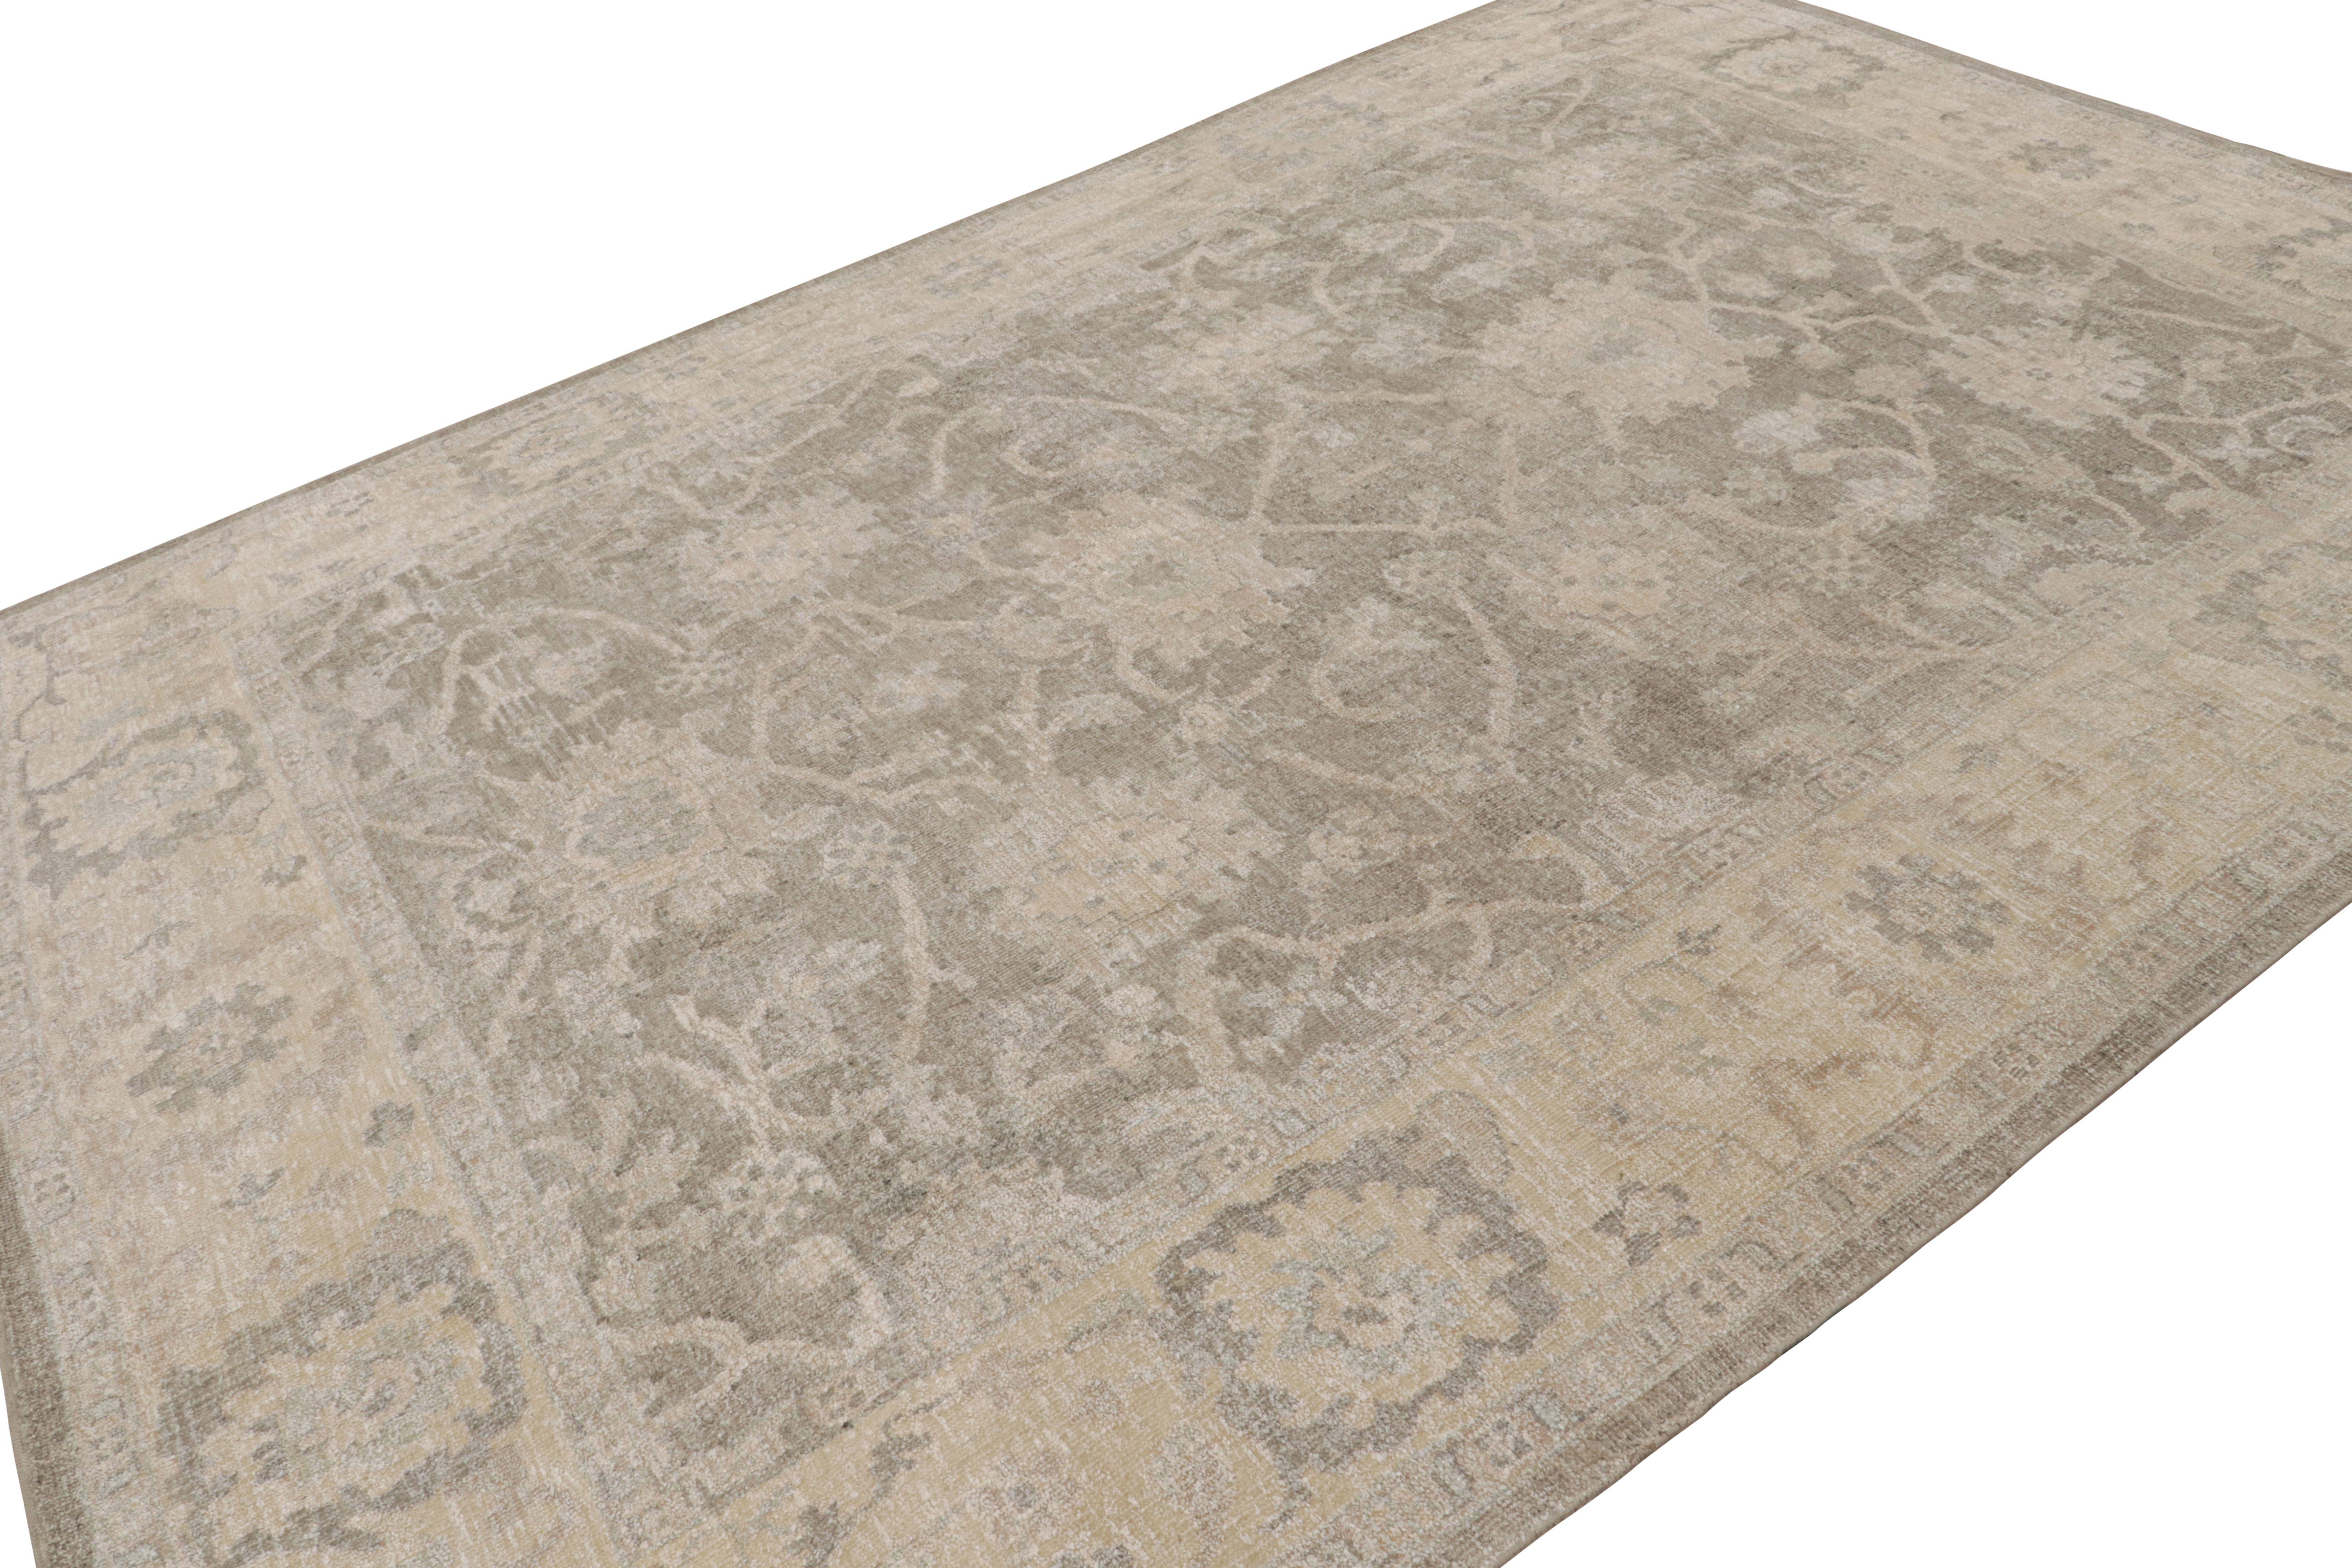 This 9x12 rug from the Modern Classics Collection by Rug & Kilim features gray and beige tones underscore floral patterns inspired by the traditional Turkish classics. 

On the design: 

Connoisseurs will admire that this rug is made with a new yarn